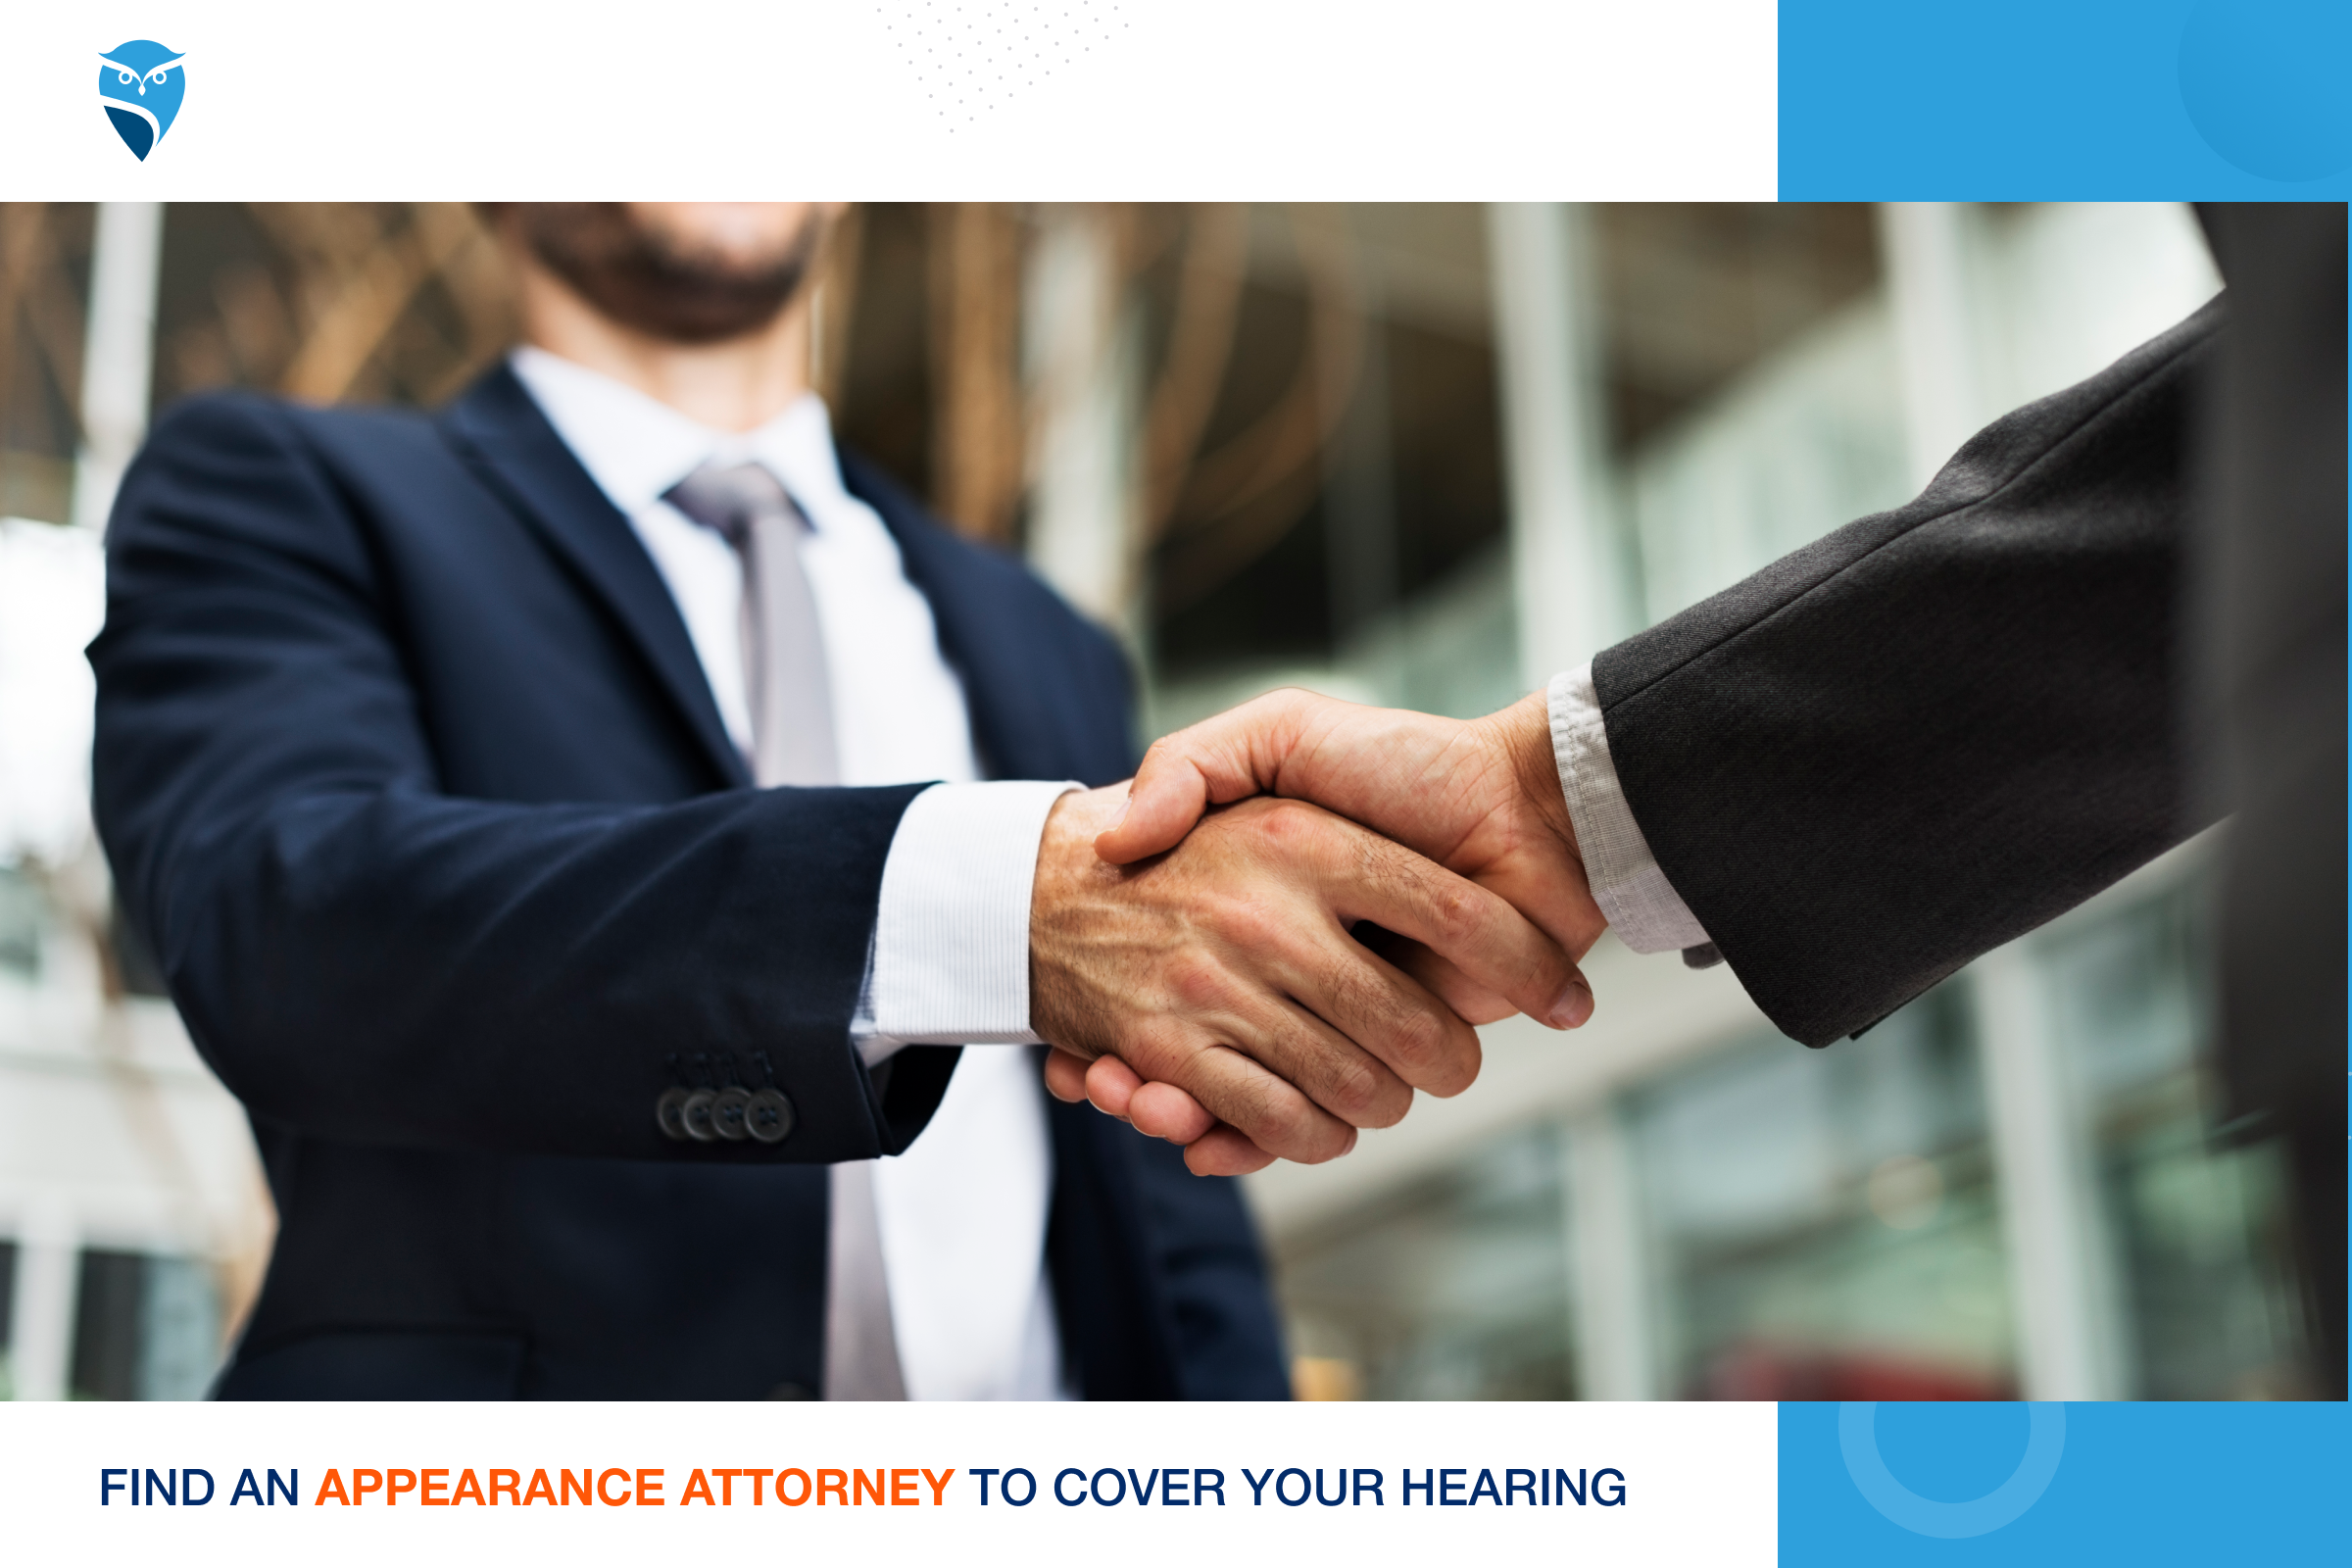 Find an Appearance Attorney to Cover your Hearing